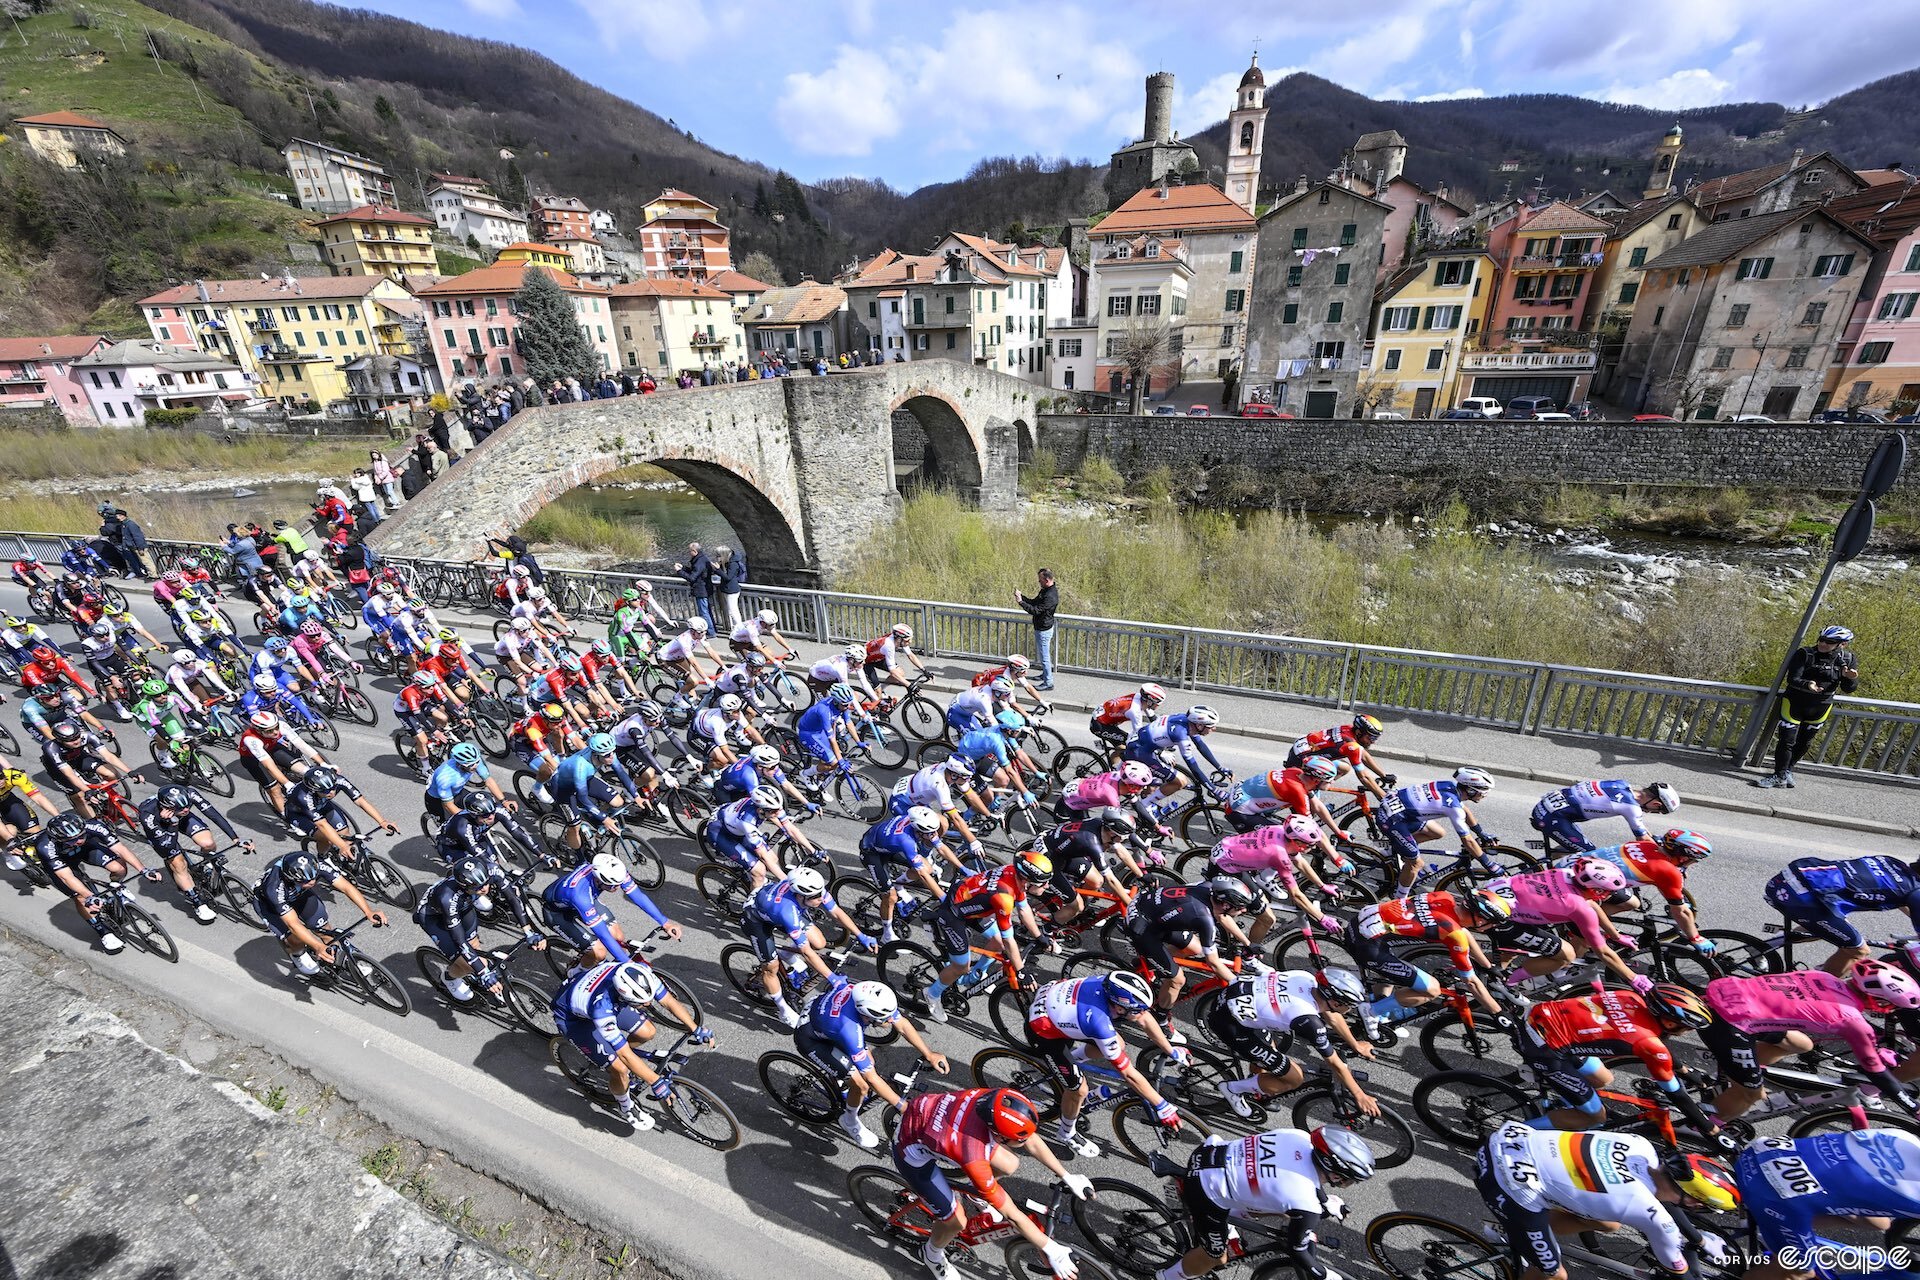 The Milan-San Remo pack passes a picturesque Italian village with red tile roofs. Fans are gathered on a pedestrian bridge over a stream to watch as the pack passes.